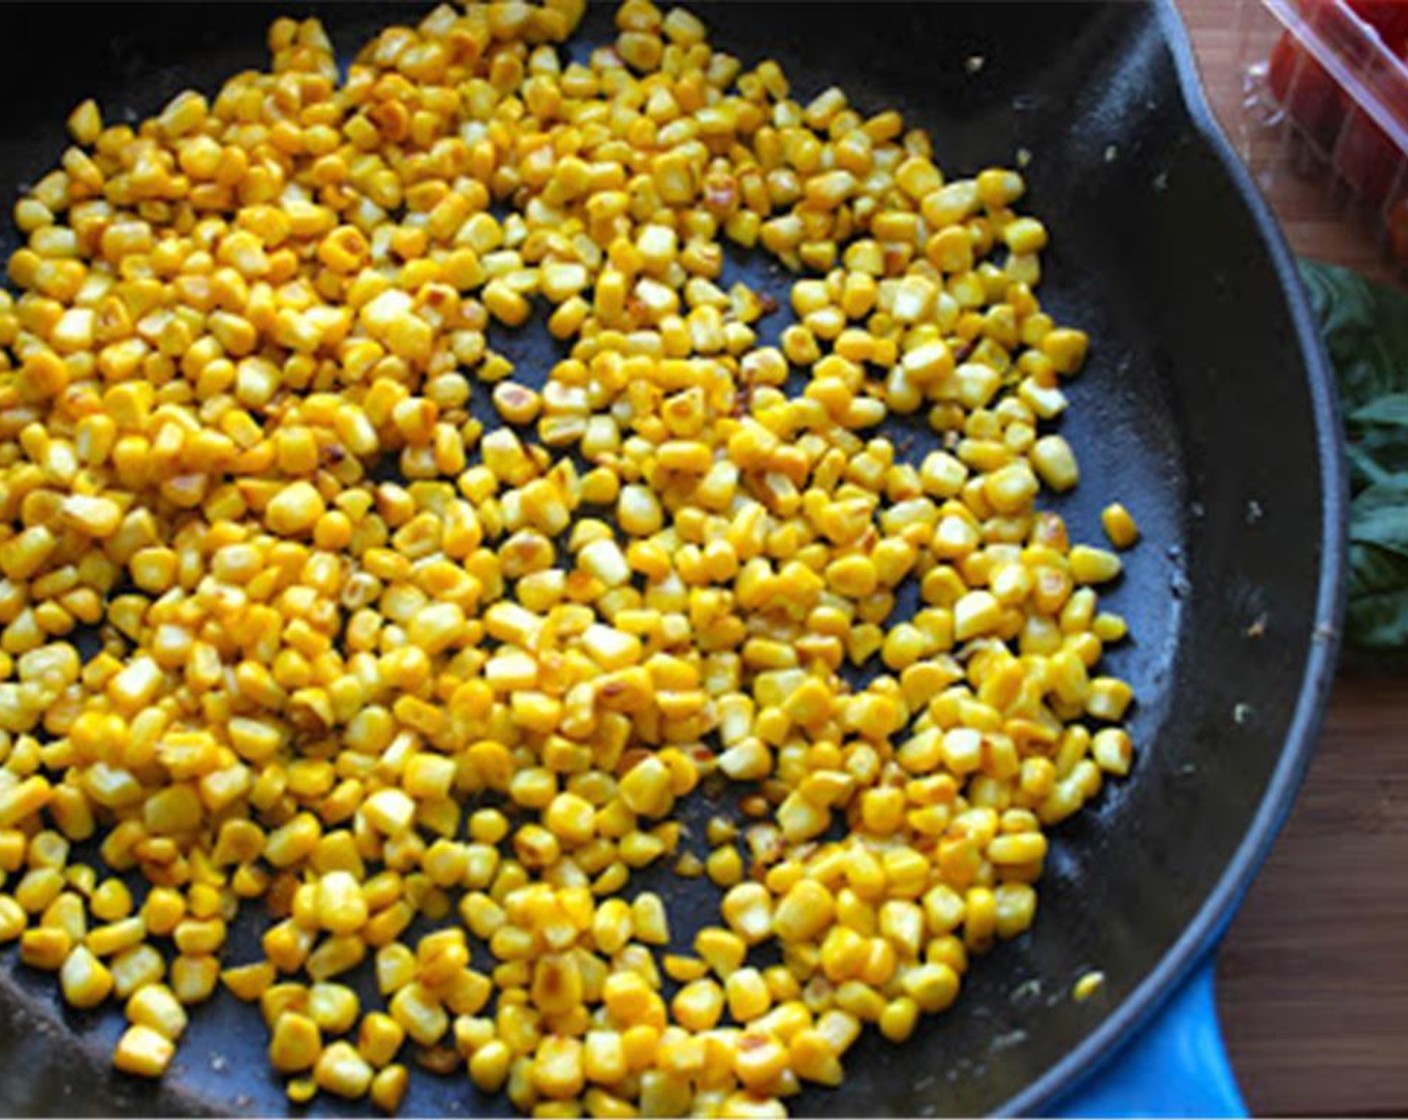 step 2 Heat 1 tbsp Extra-Virgin Olive Oil (1 Tbsp) in a cast iron skillet. When hot, add the corn and sauté for 8-10 minutes until the corn is tender and well browned. Transfer the cooked corn to a large mixing bowl and let cool to room temperature.